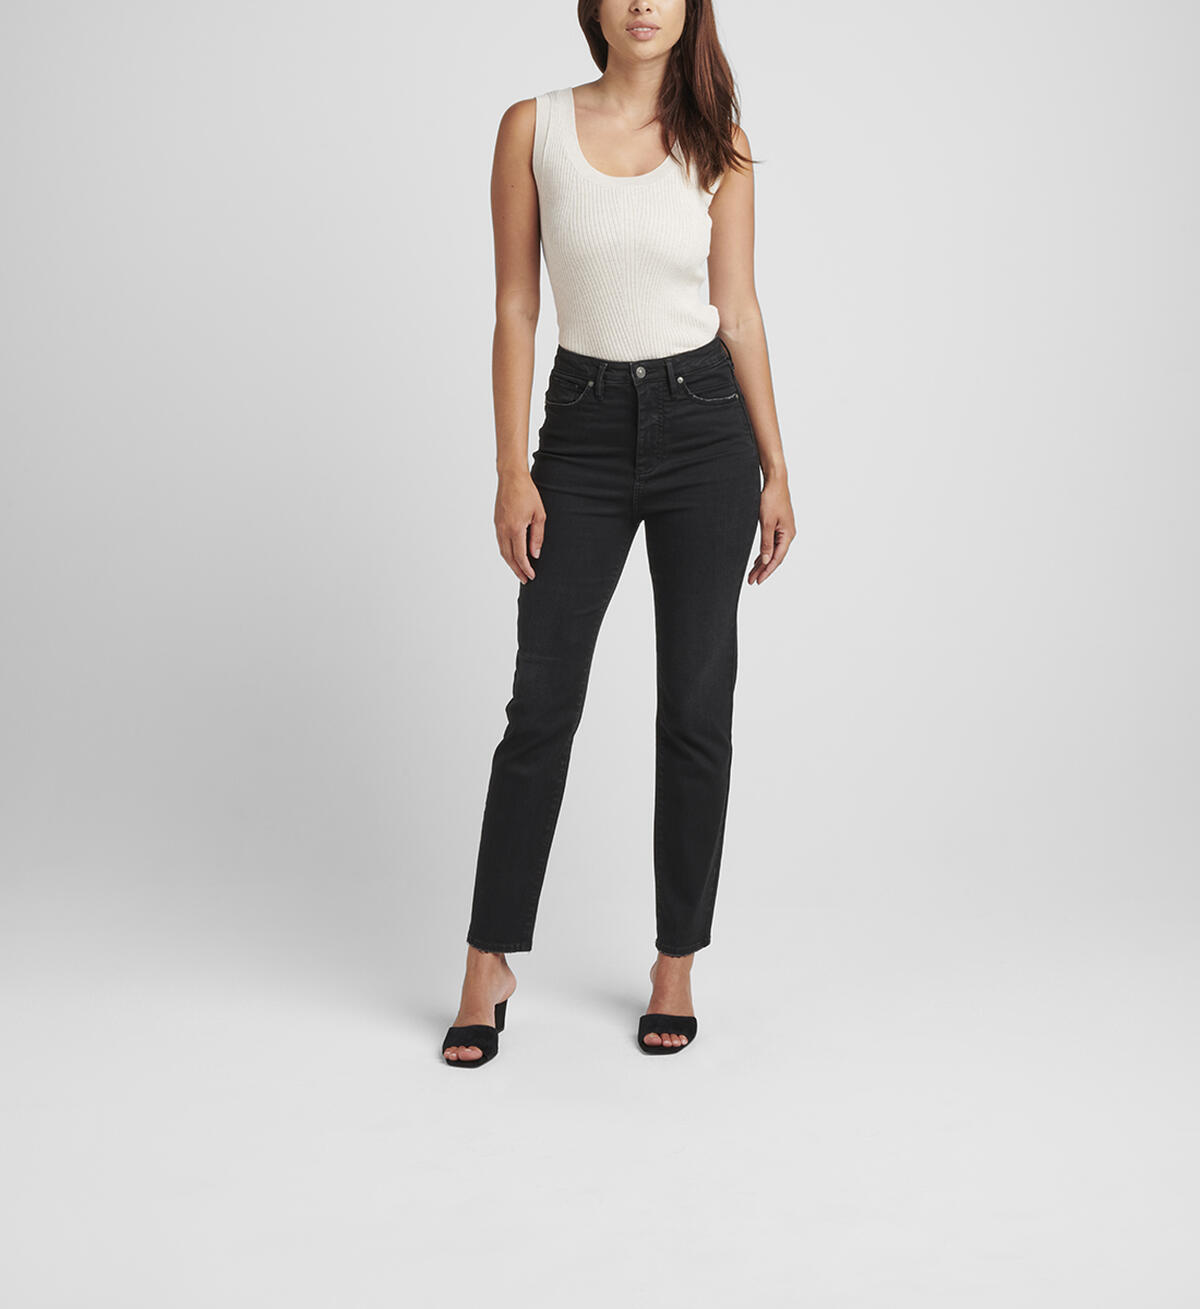 Aikins High Rise Straight Leg Jeans, , hi-res image number 0